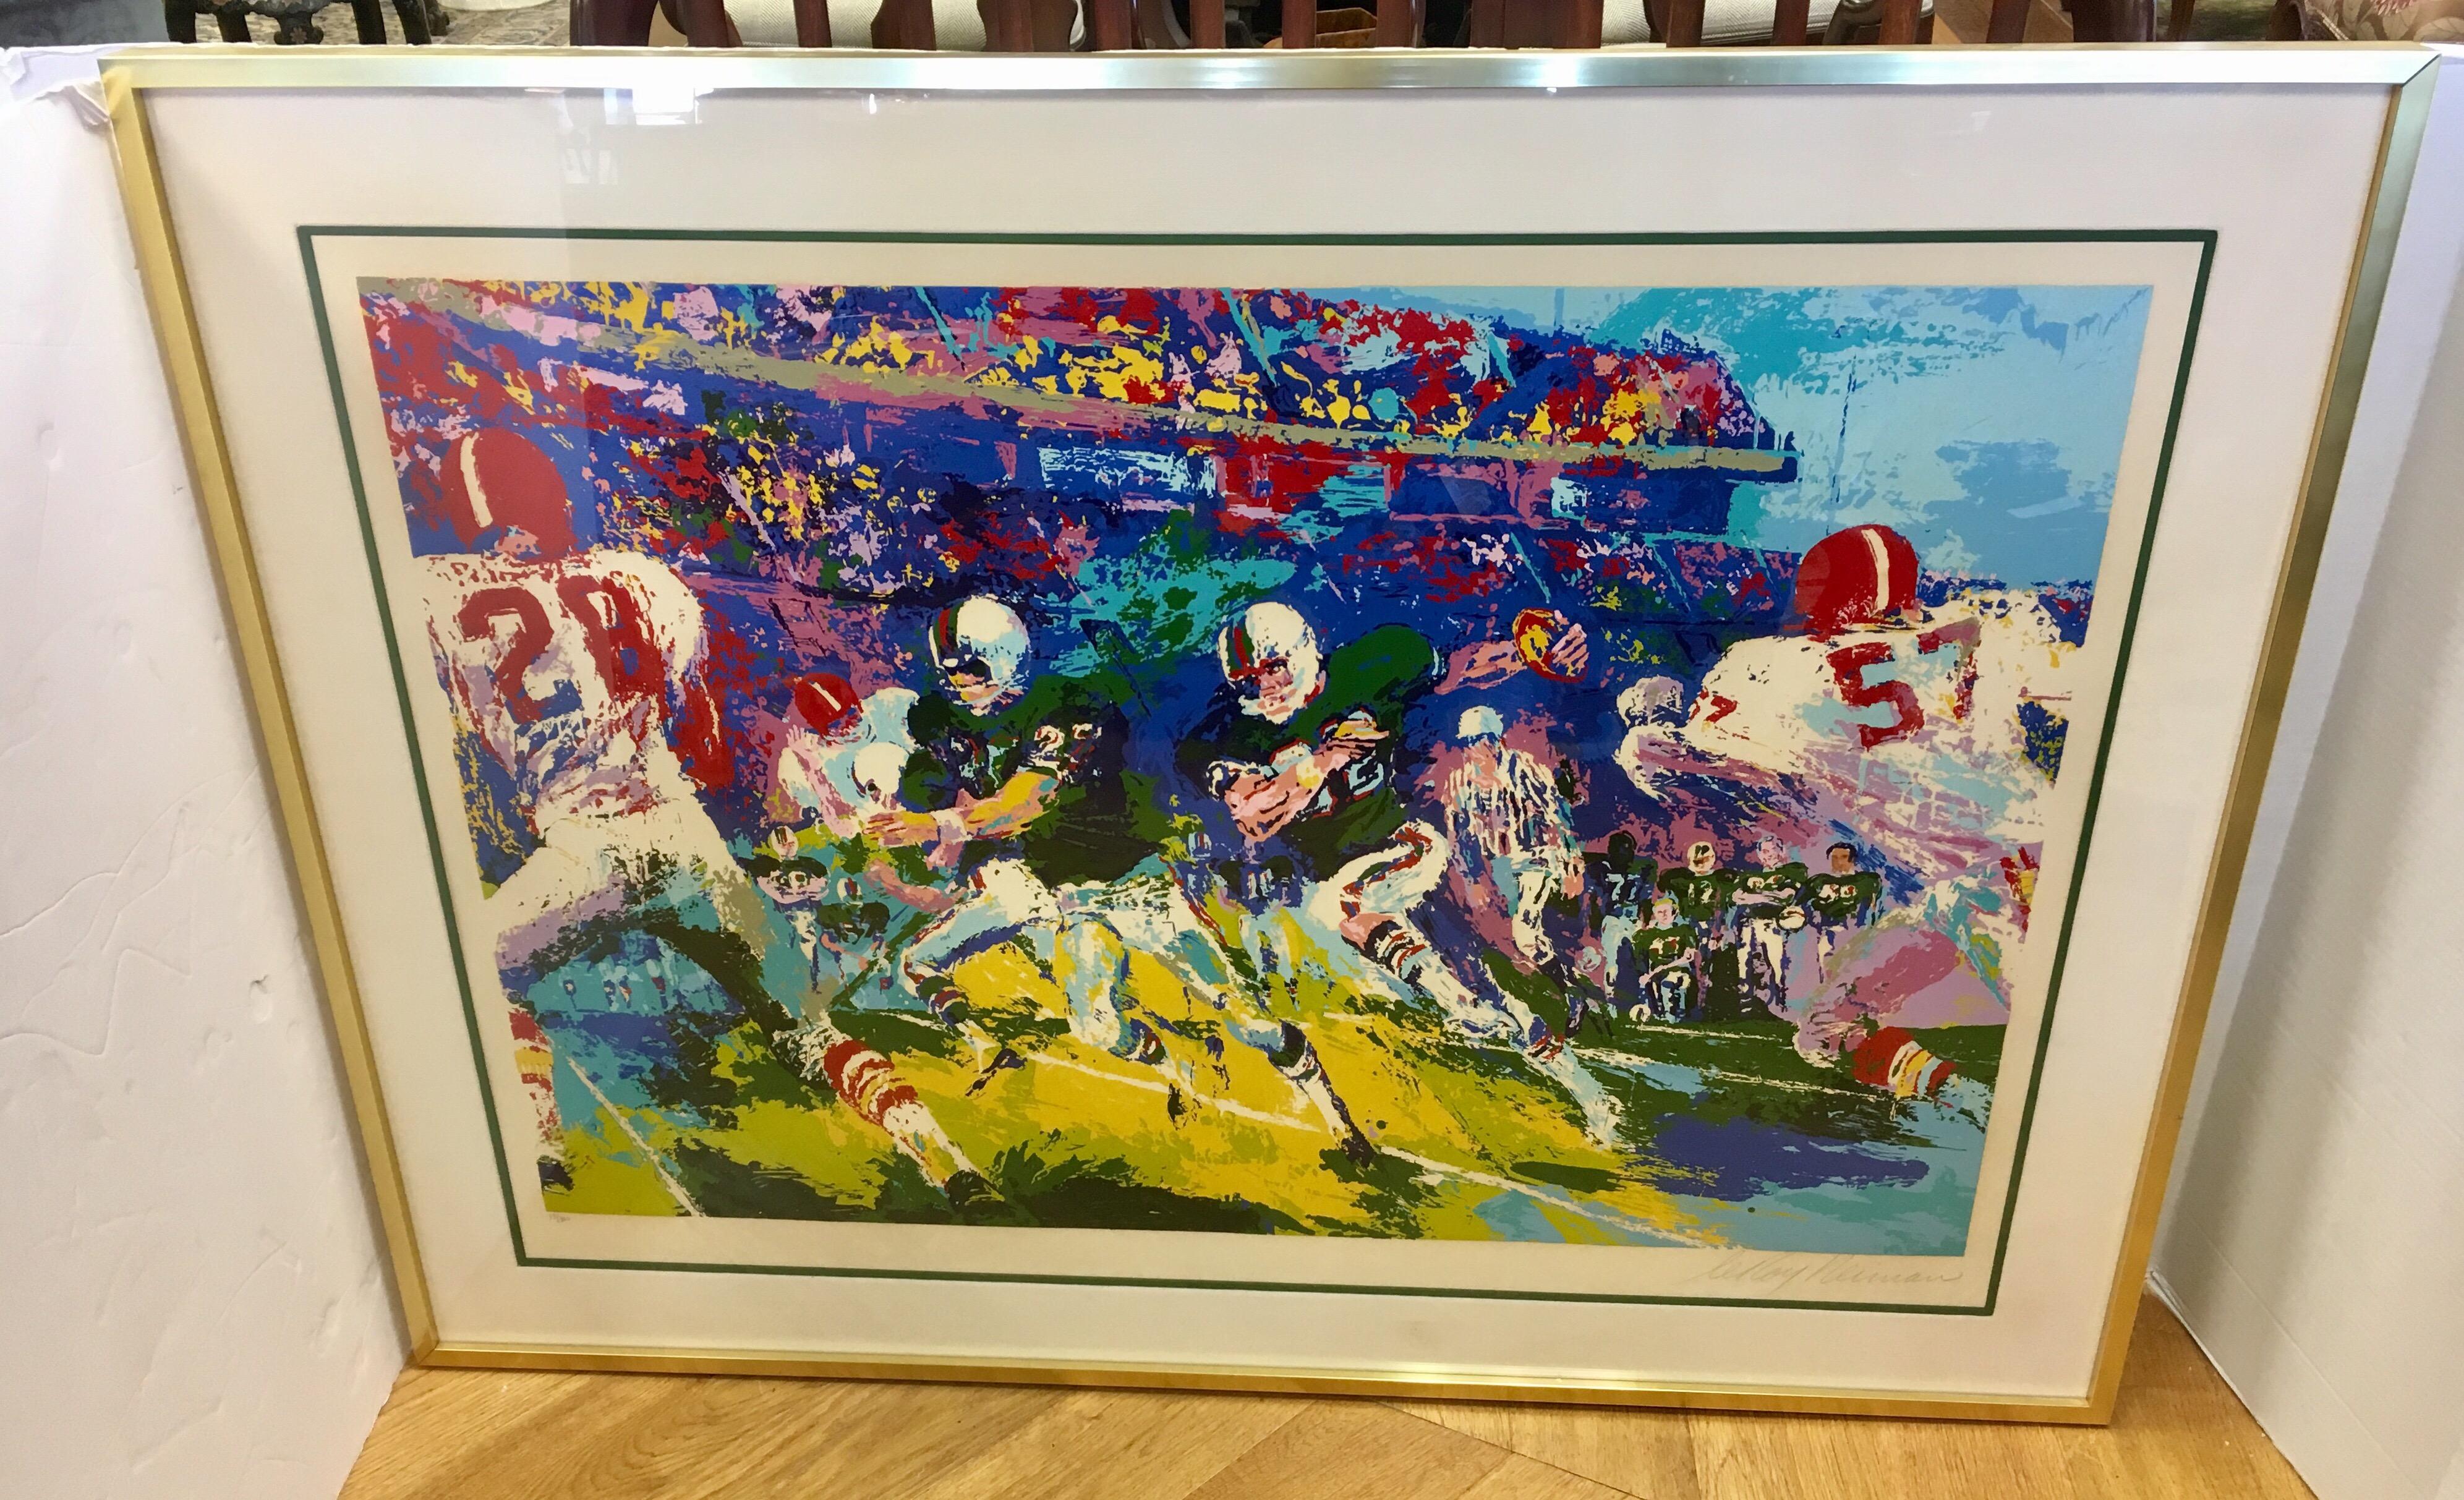 Coveted Leroy Neiman signed in pencil serigraph of gridiron scene. It is numbered 13 of 300.
It is protected under glass and in very tasteful frame. A big piece with wonderful colors guaranteed to make your room pop!